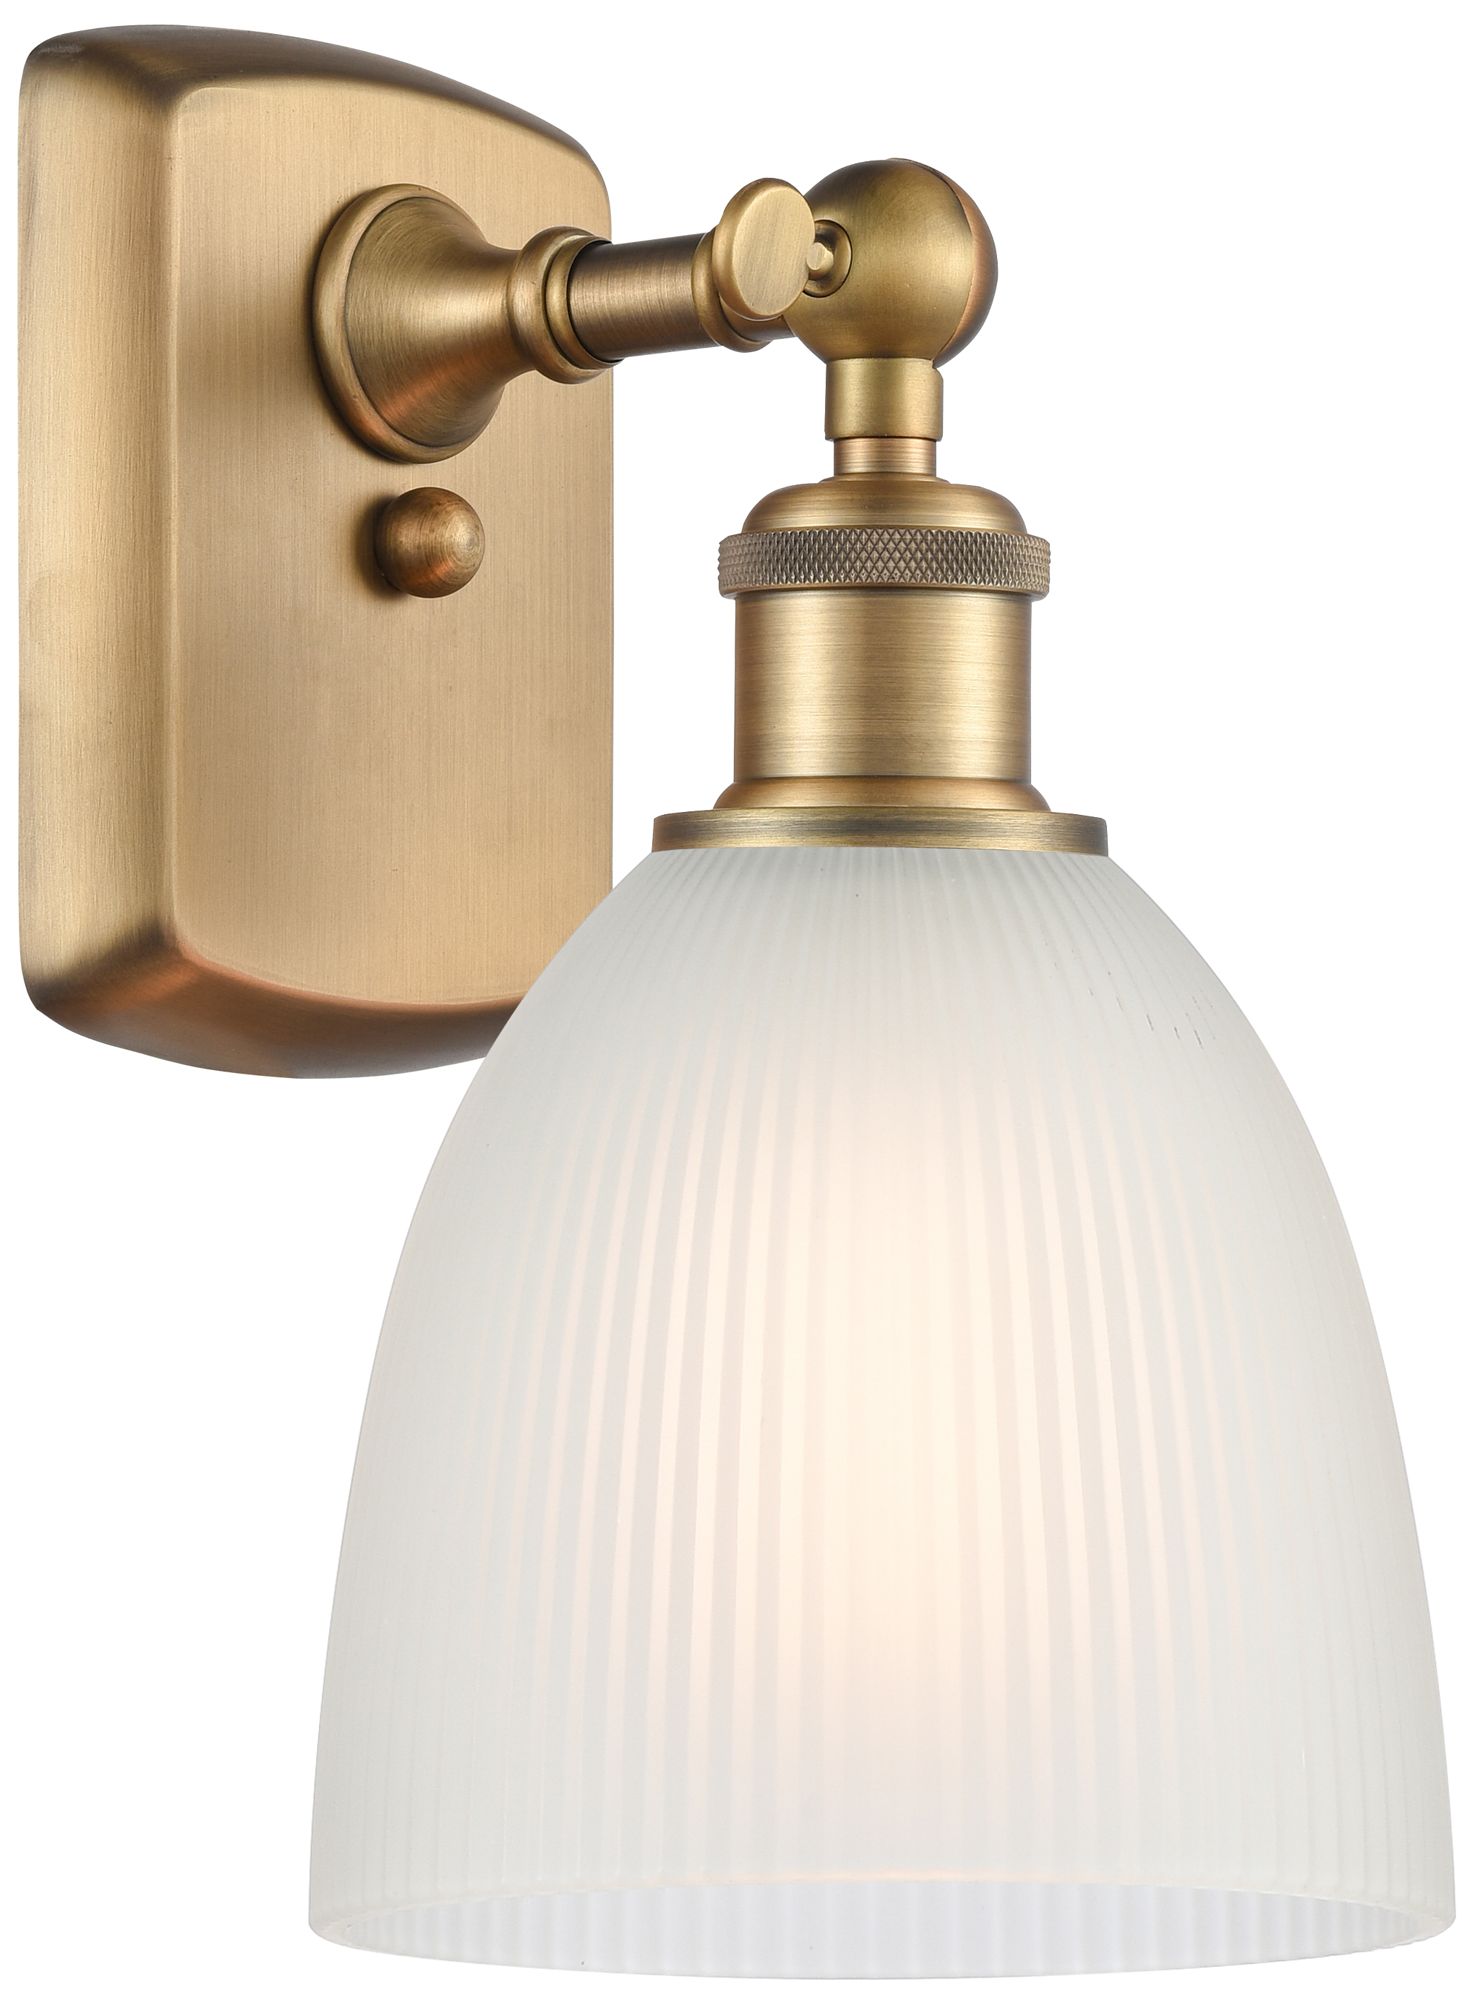 Castile 11" High Brushed Brass Sconce w/ White Shade